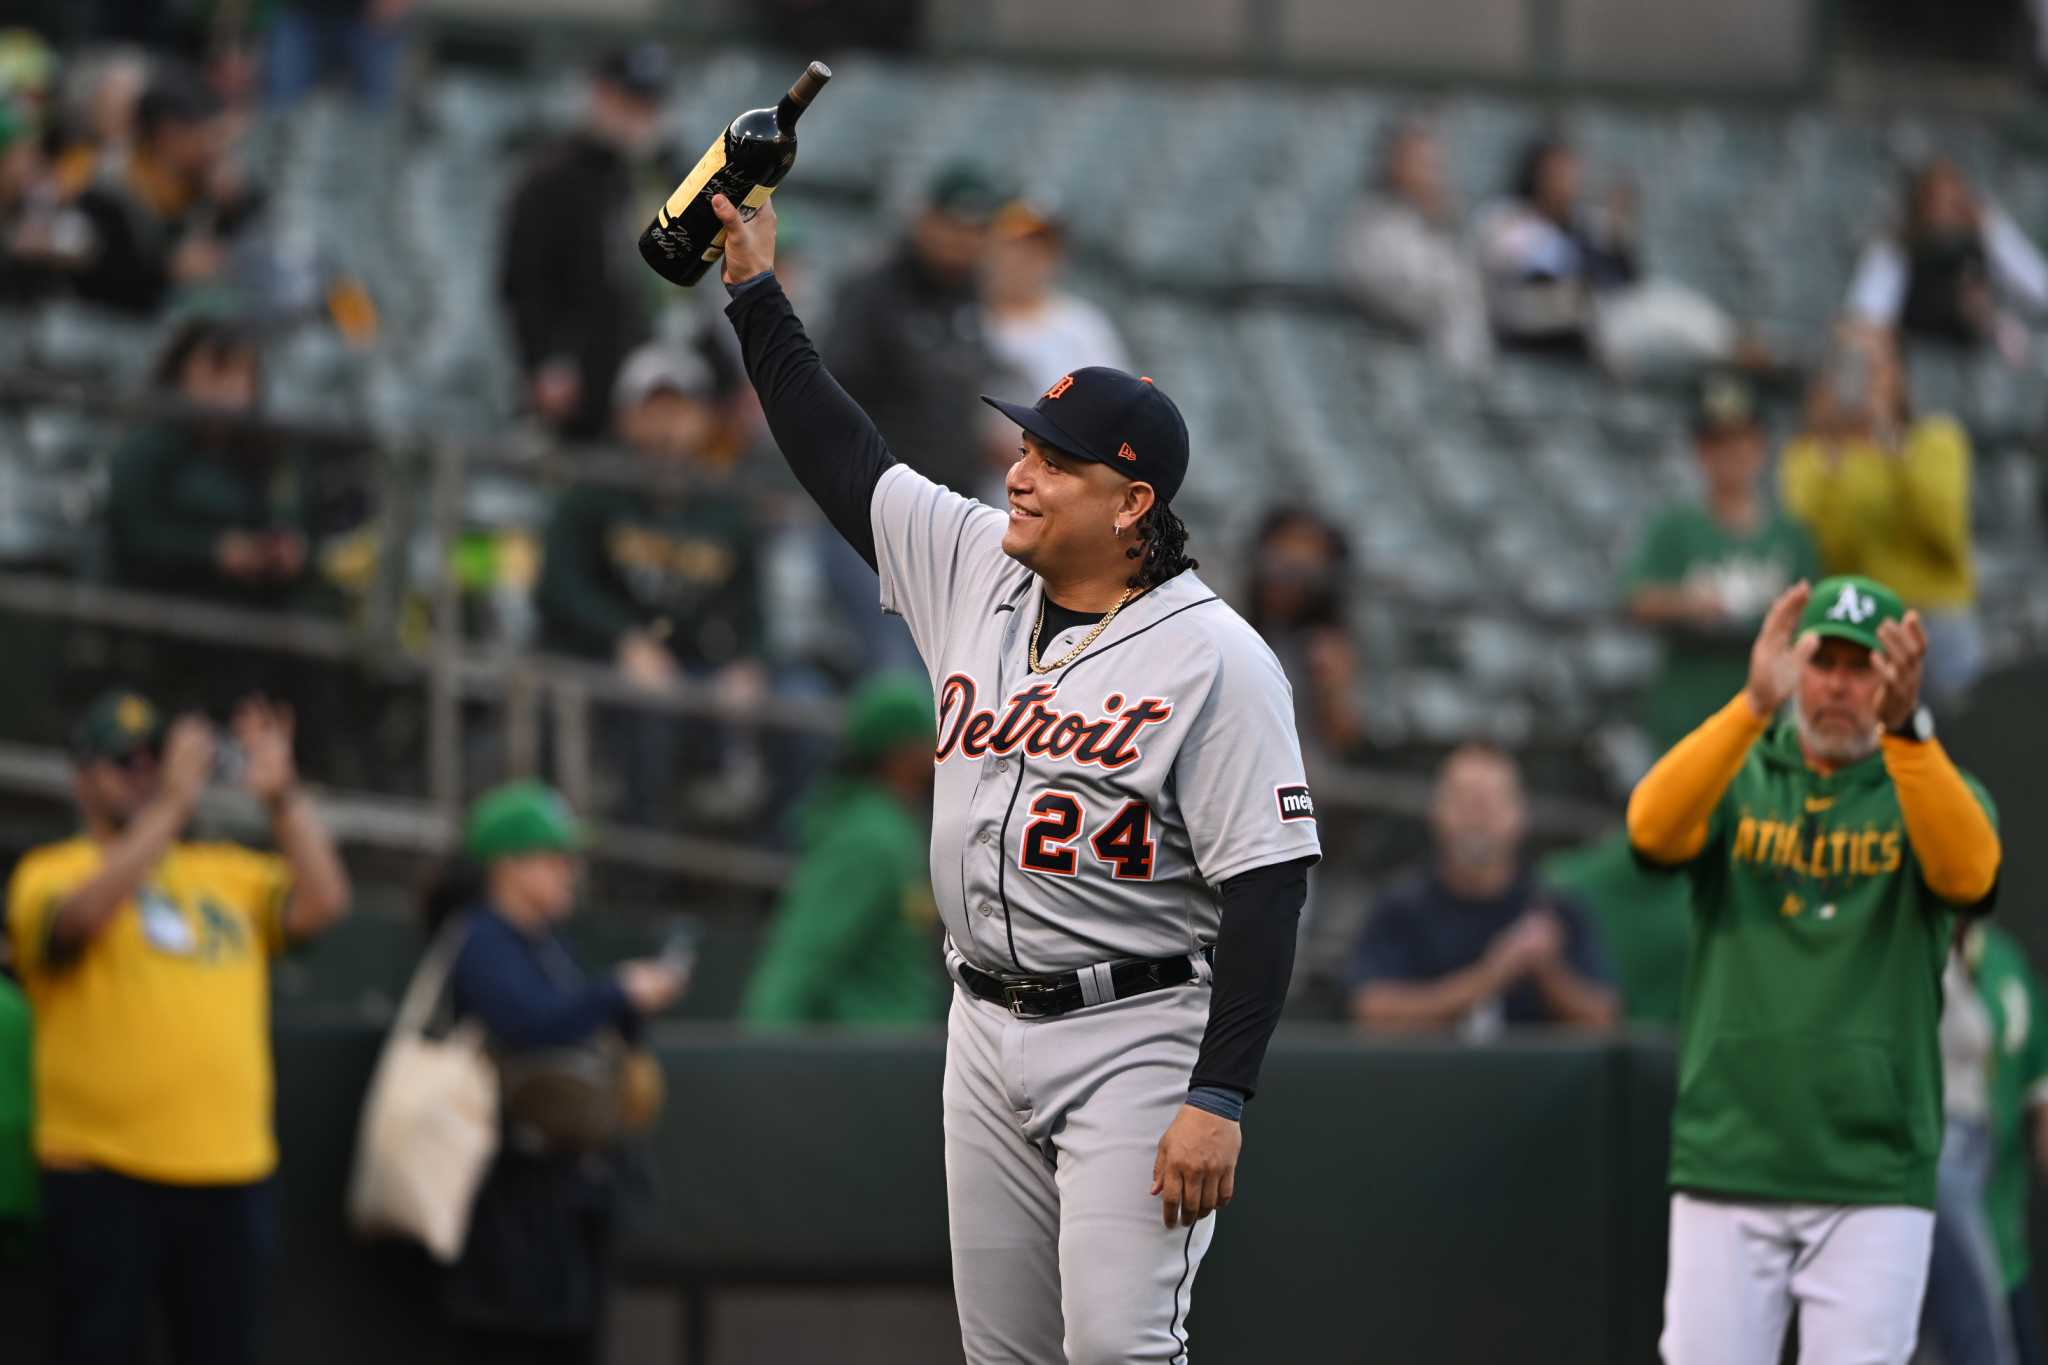 For Miguel Cabrera, time in Detroit has been about more than baseball